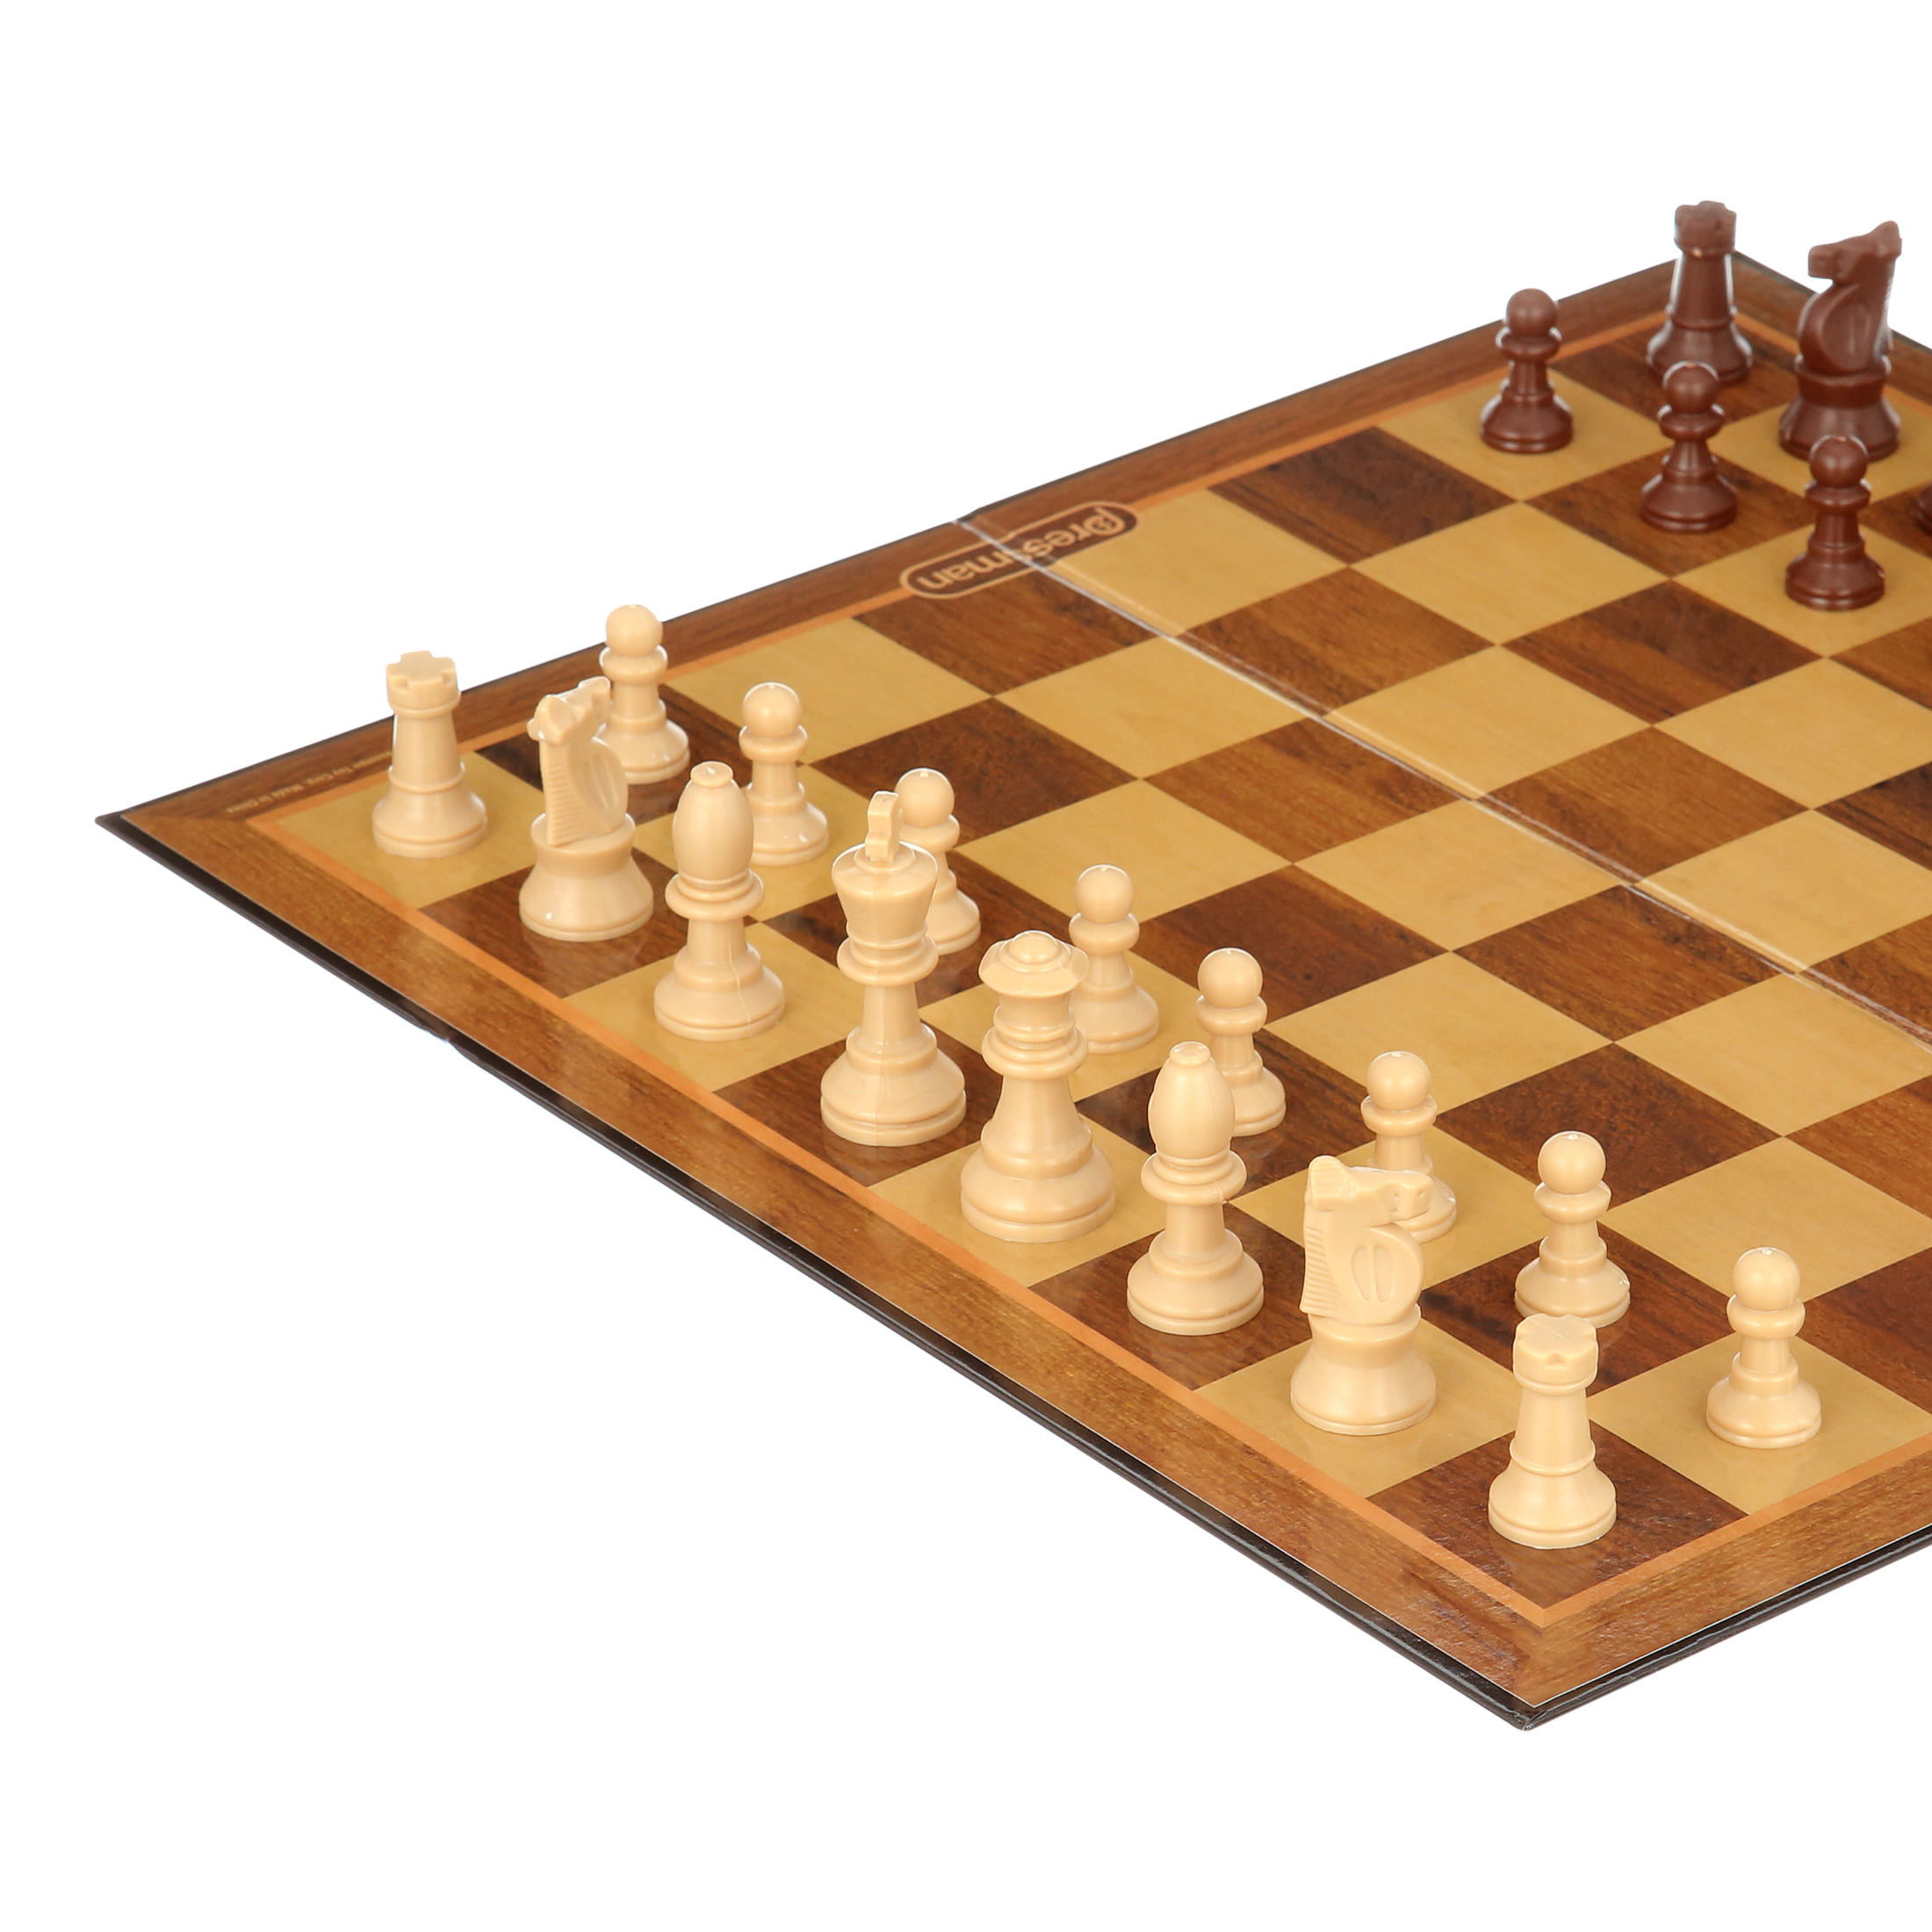 Pressman Toys - Family Classics Chess With Folding Board and Full Size Chess Pieces - image 4 of 6